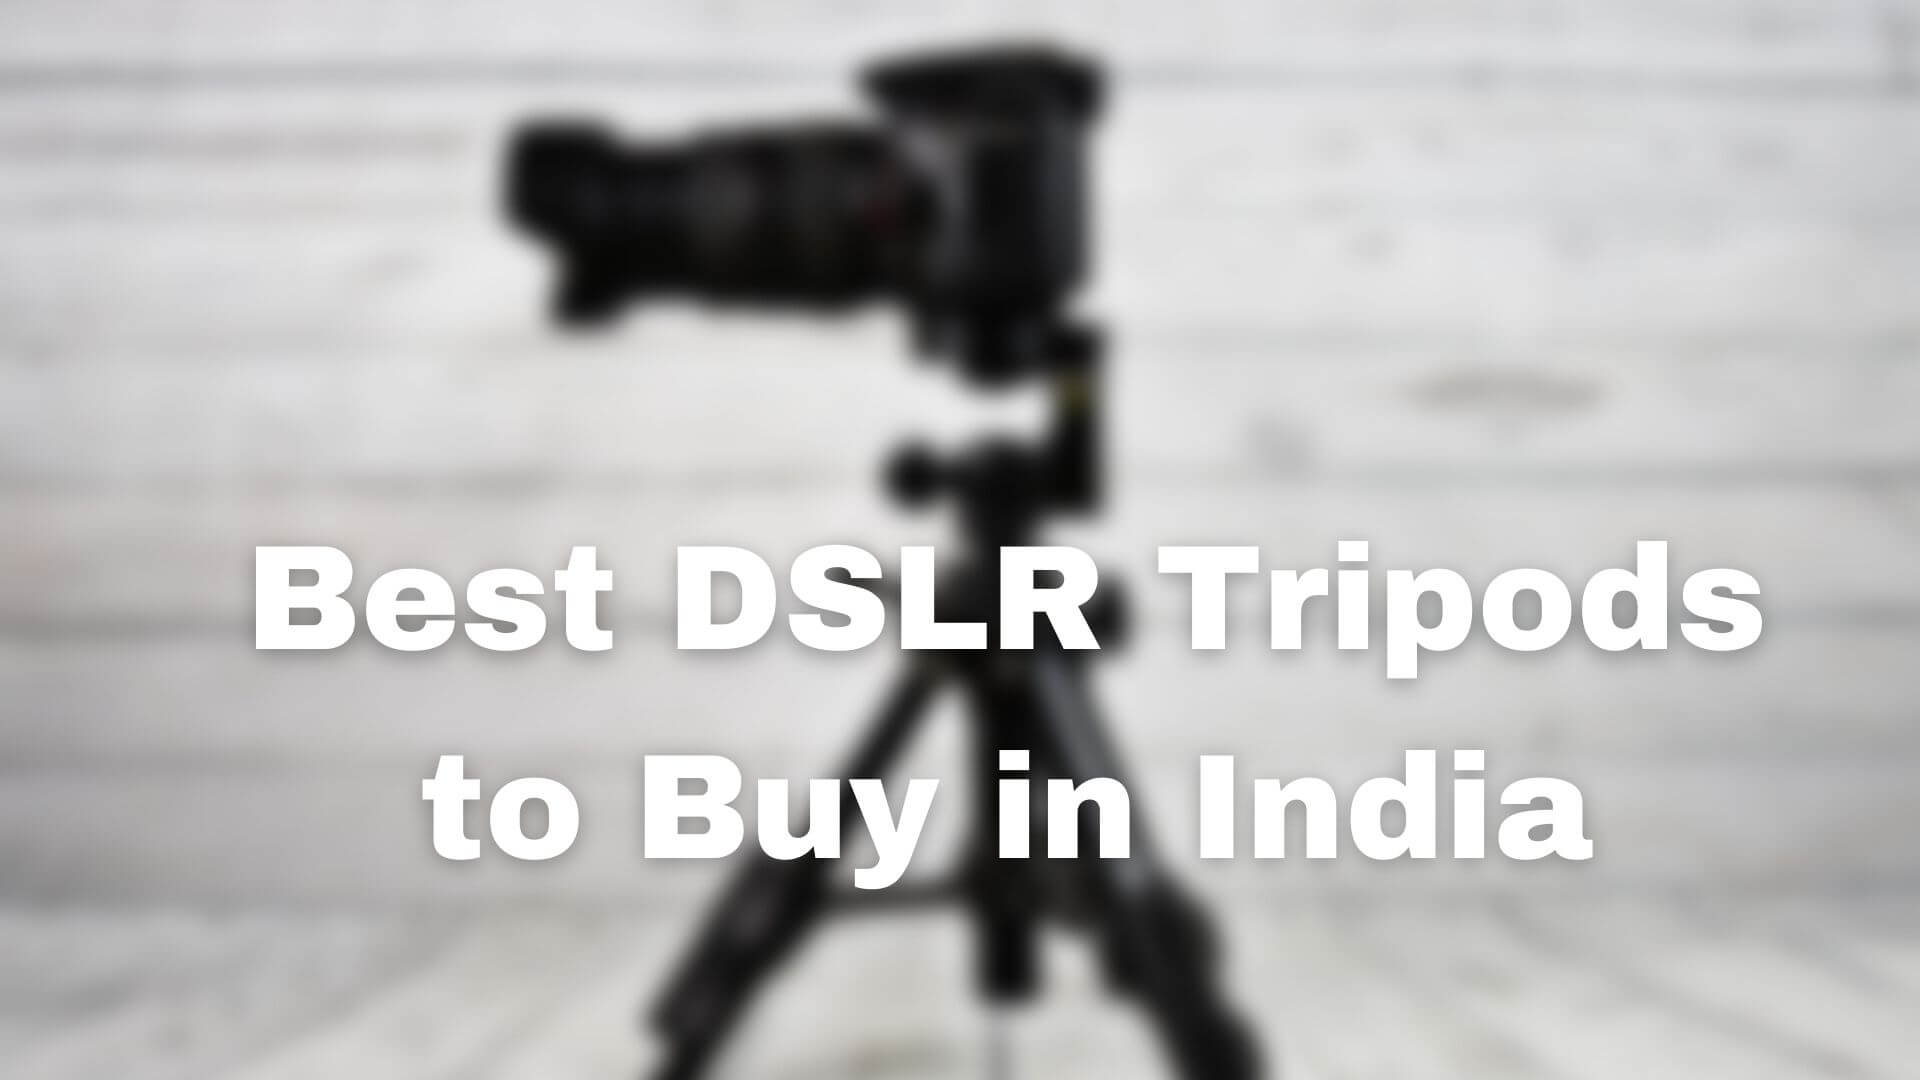 Best DSLR Tripods to Buy in India